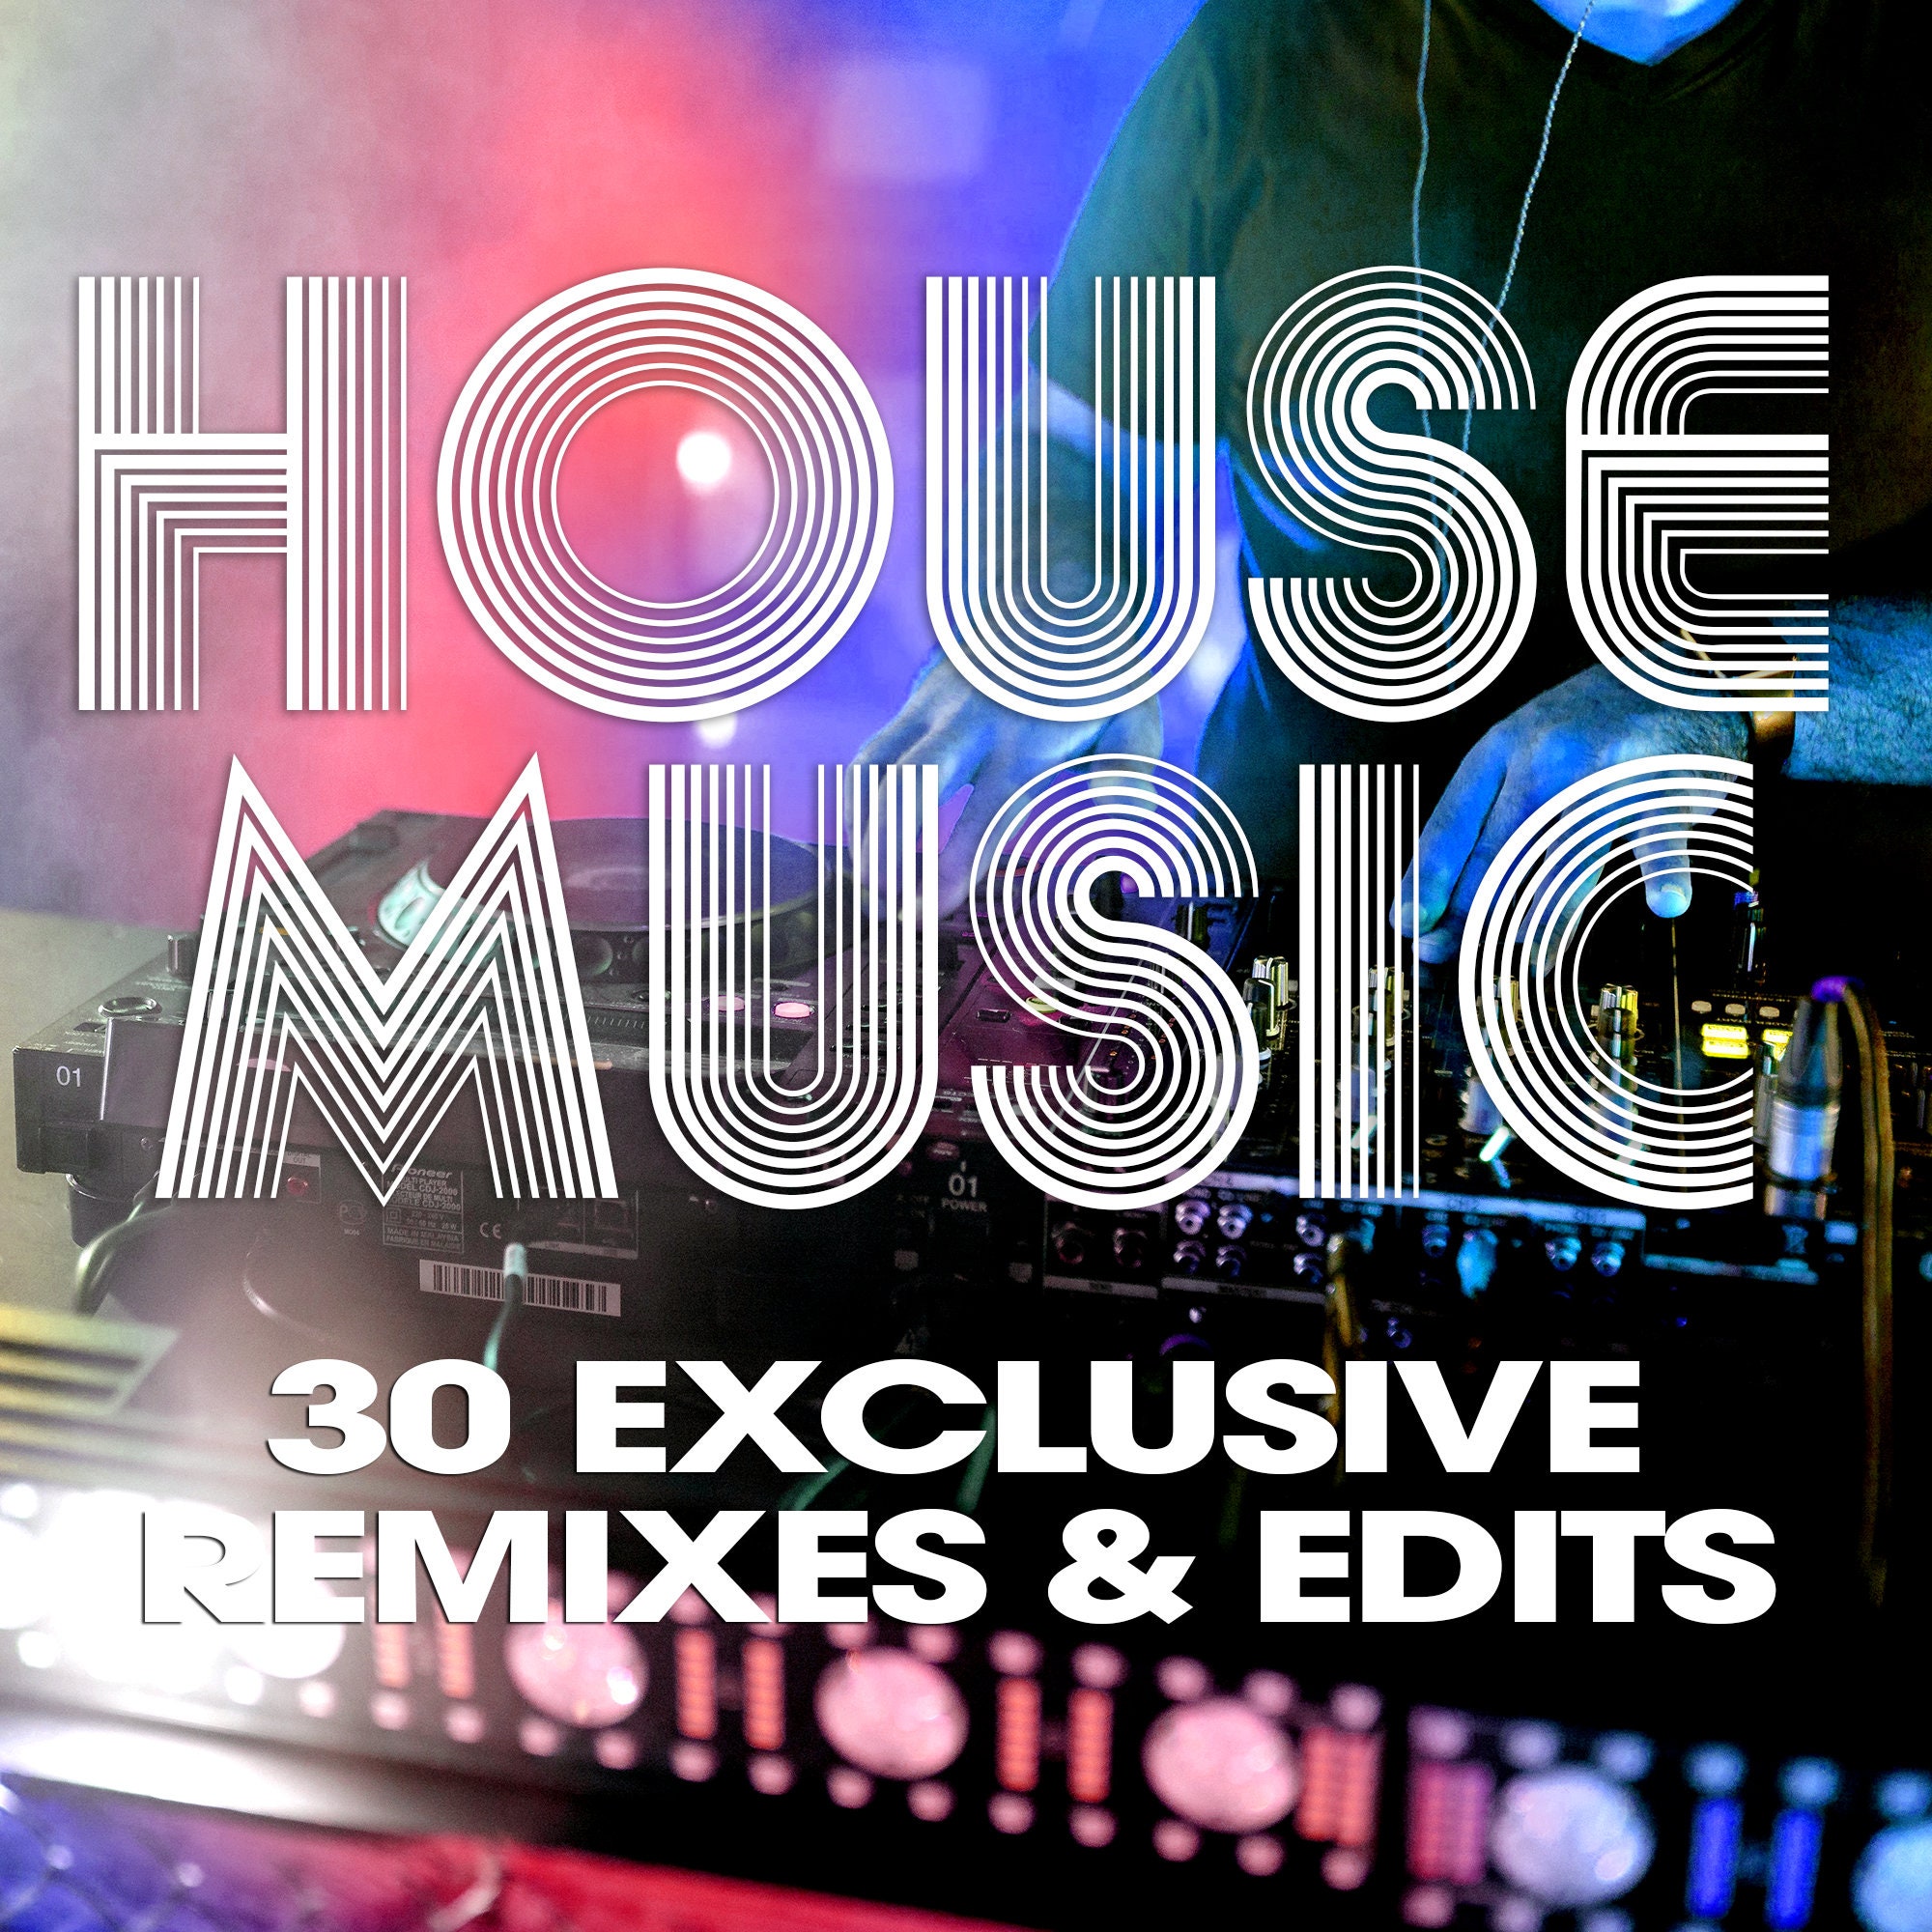 House Music Remixes and Edits for Djs and House Music Enthusiasts ...